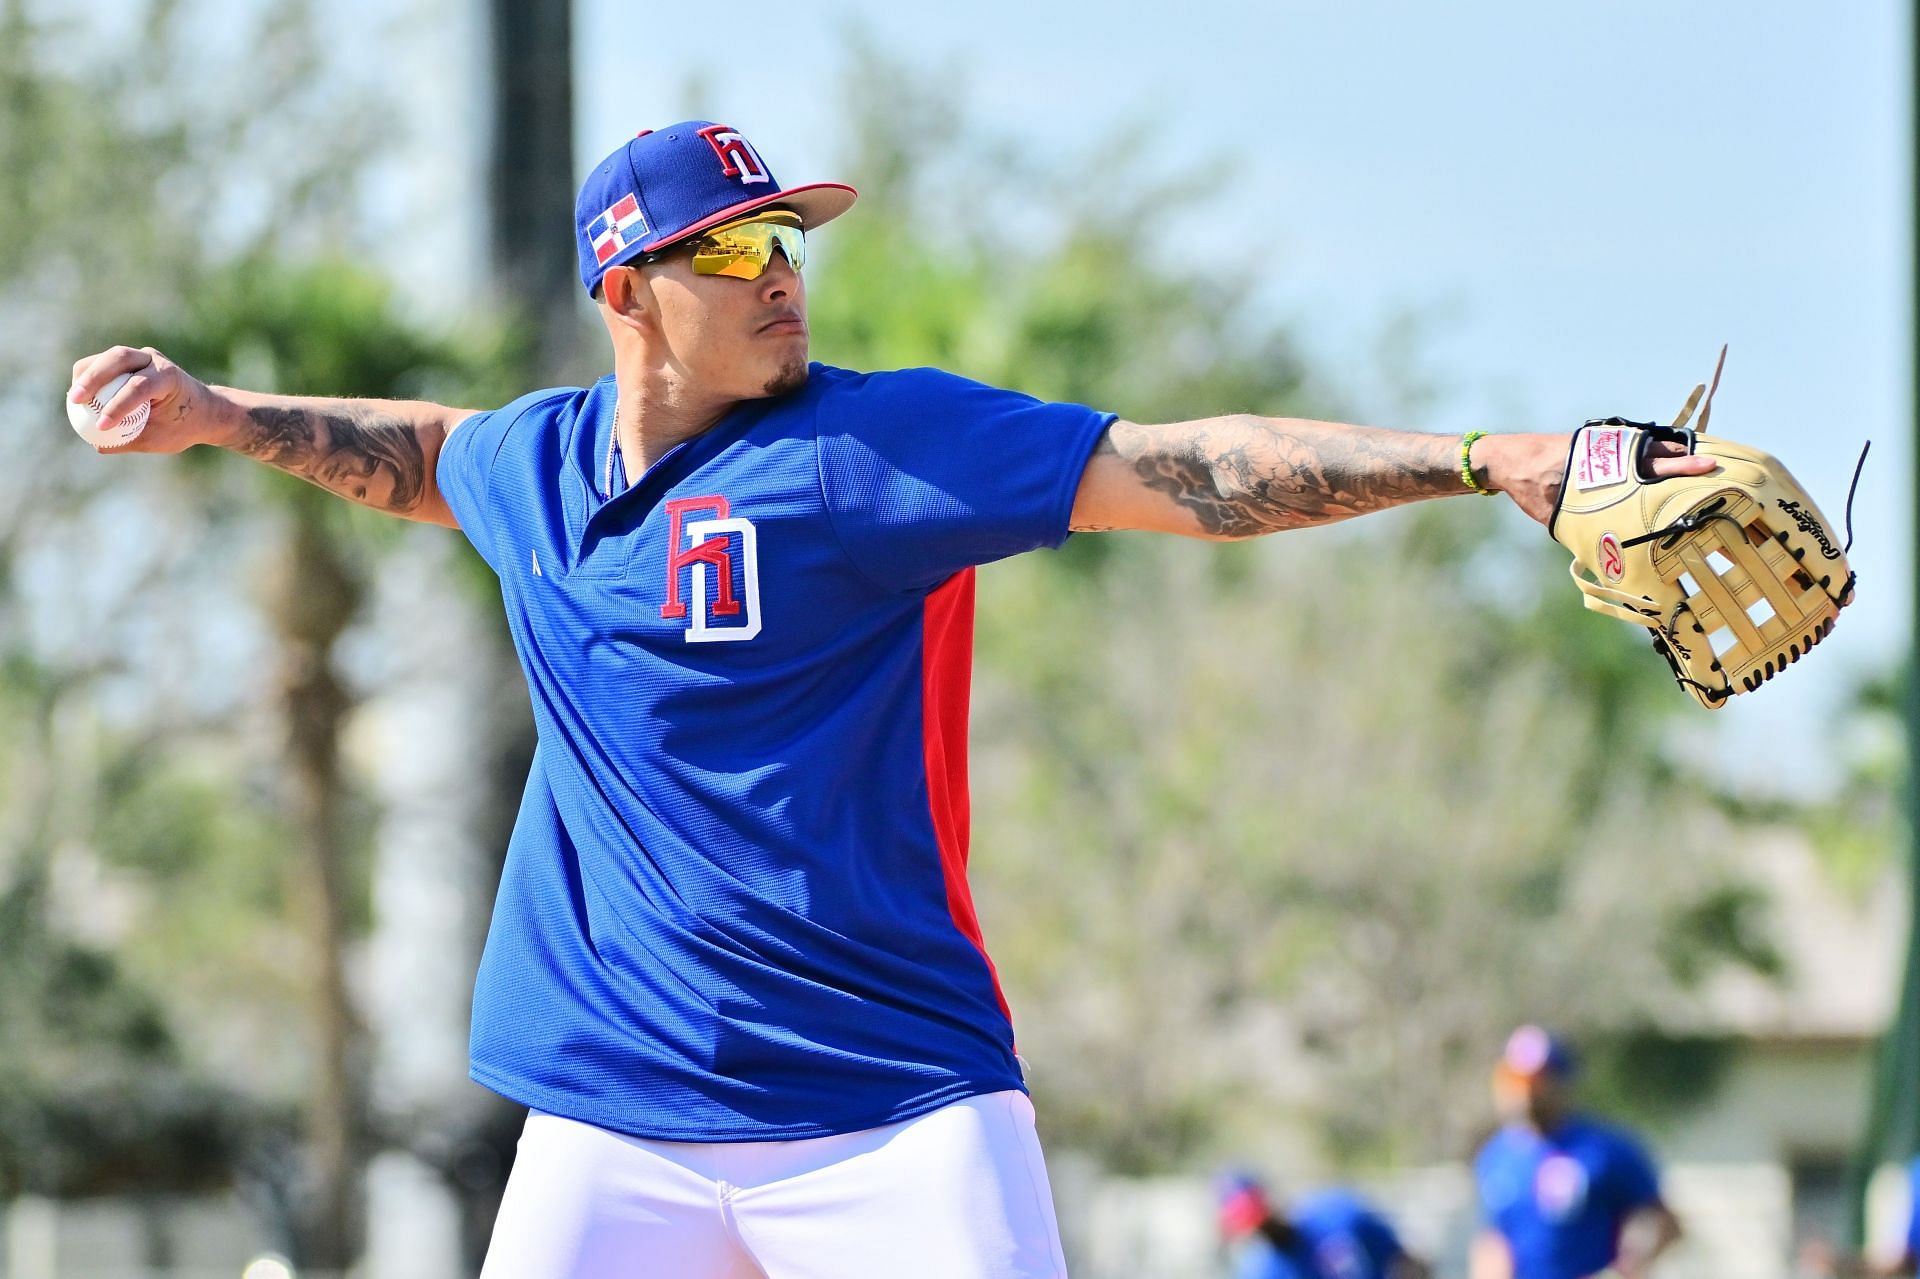 When Manny Machado embraced Dominican Roots by representing his